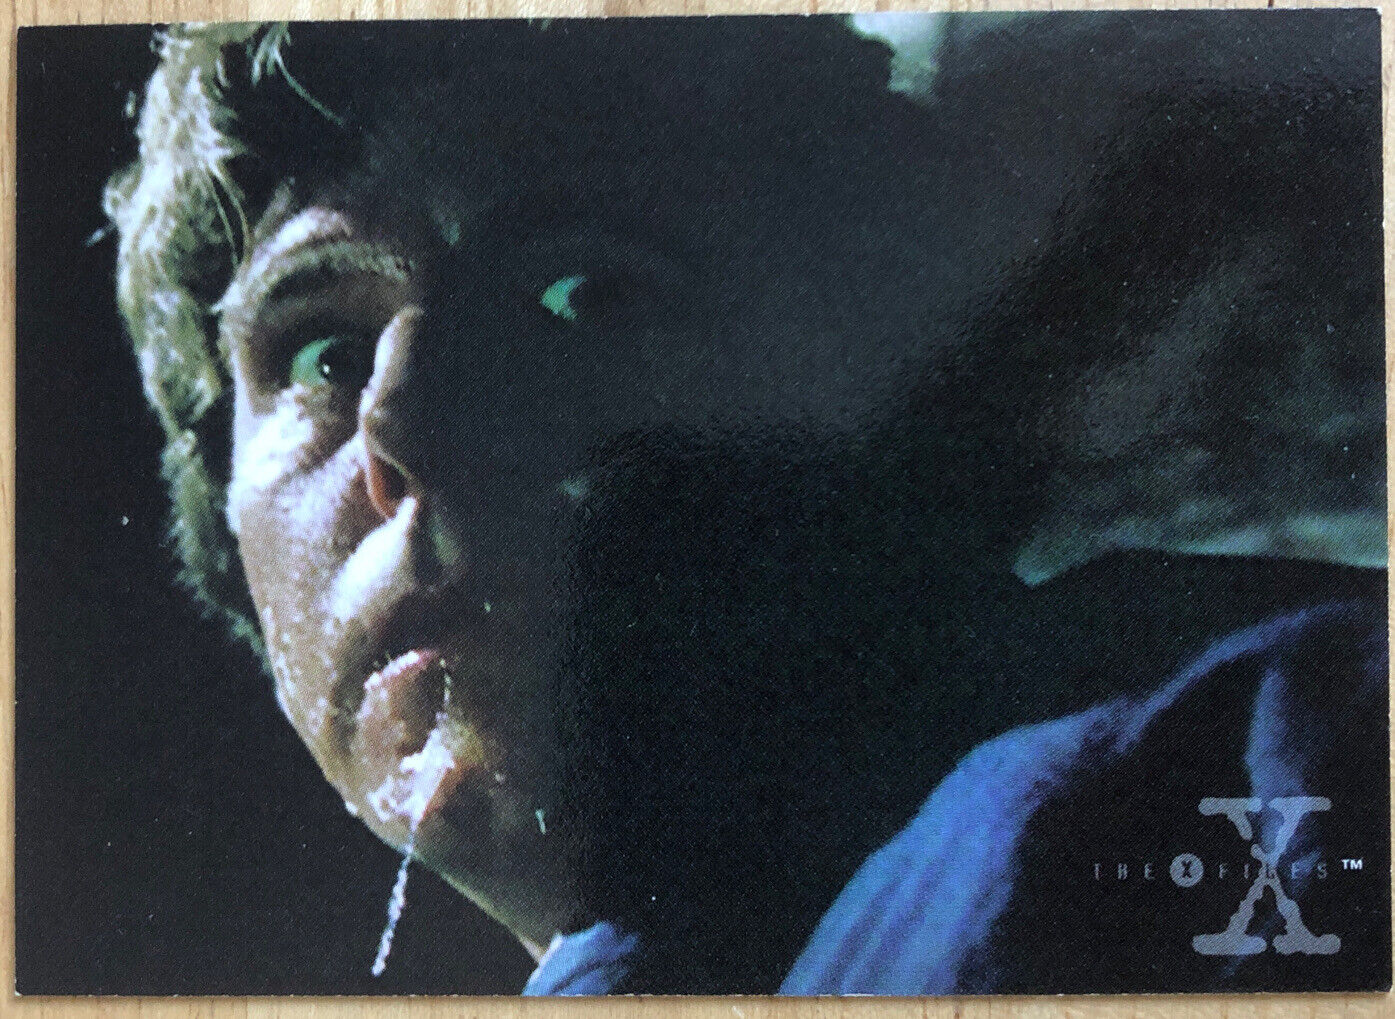 Topps - The X Files Paranormals Trading Card - #40 Genetically Different Human